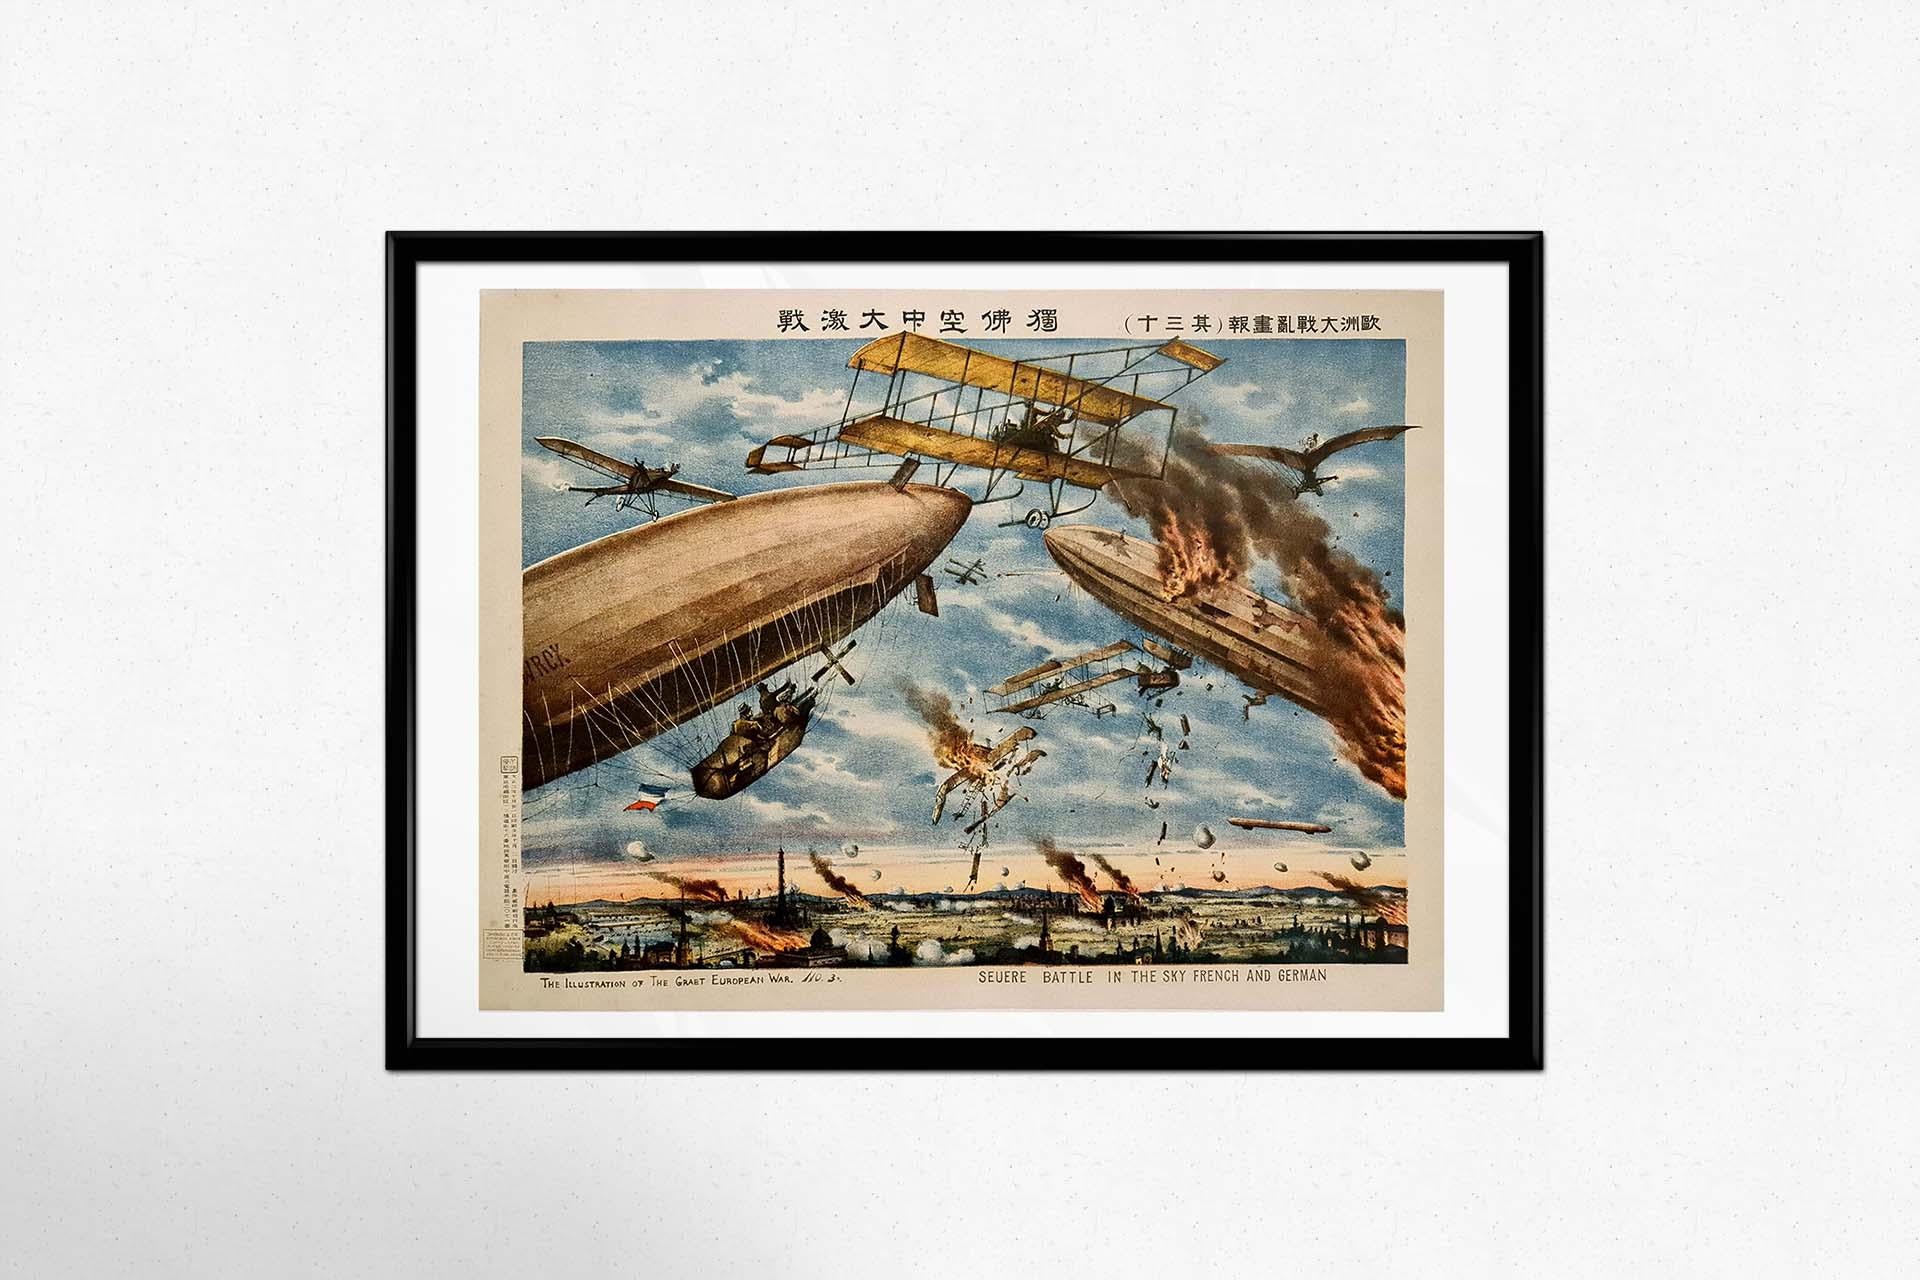 The 1914 original poster depicting the Seuere battle in the sky between French and German forces offers a striking glimpse into the tumultuous era of the Great European War. Produced amid the throes of conflict and printed by Shobido & Co in Tokyo,